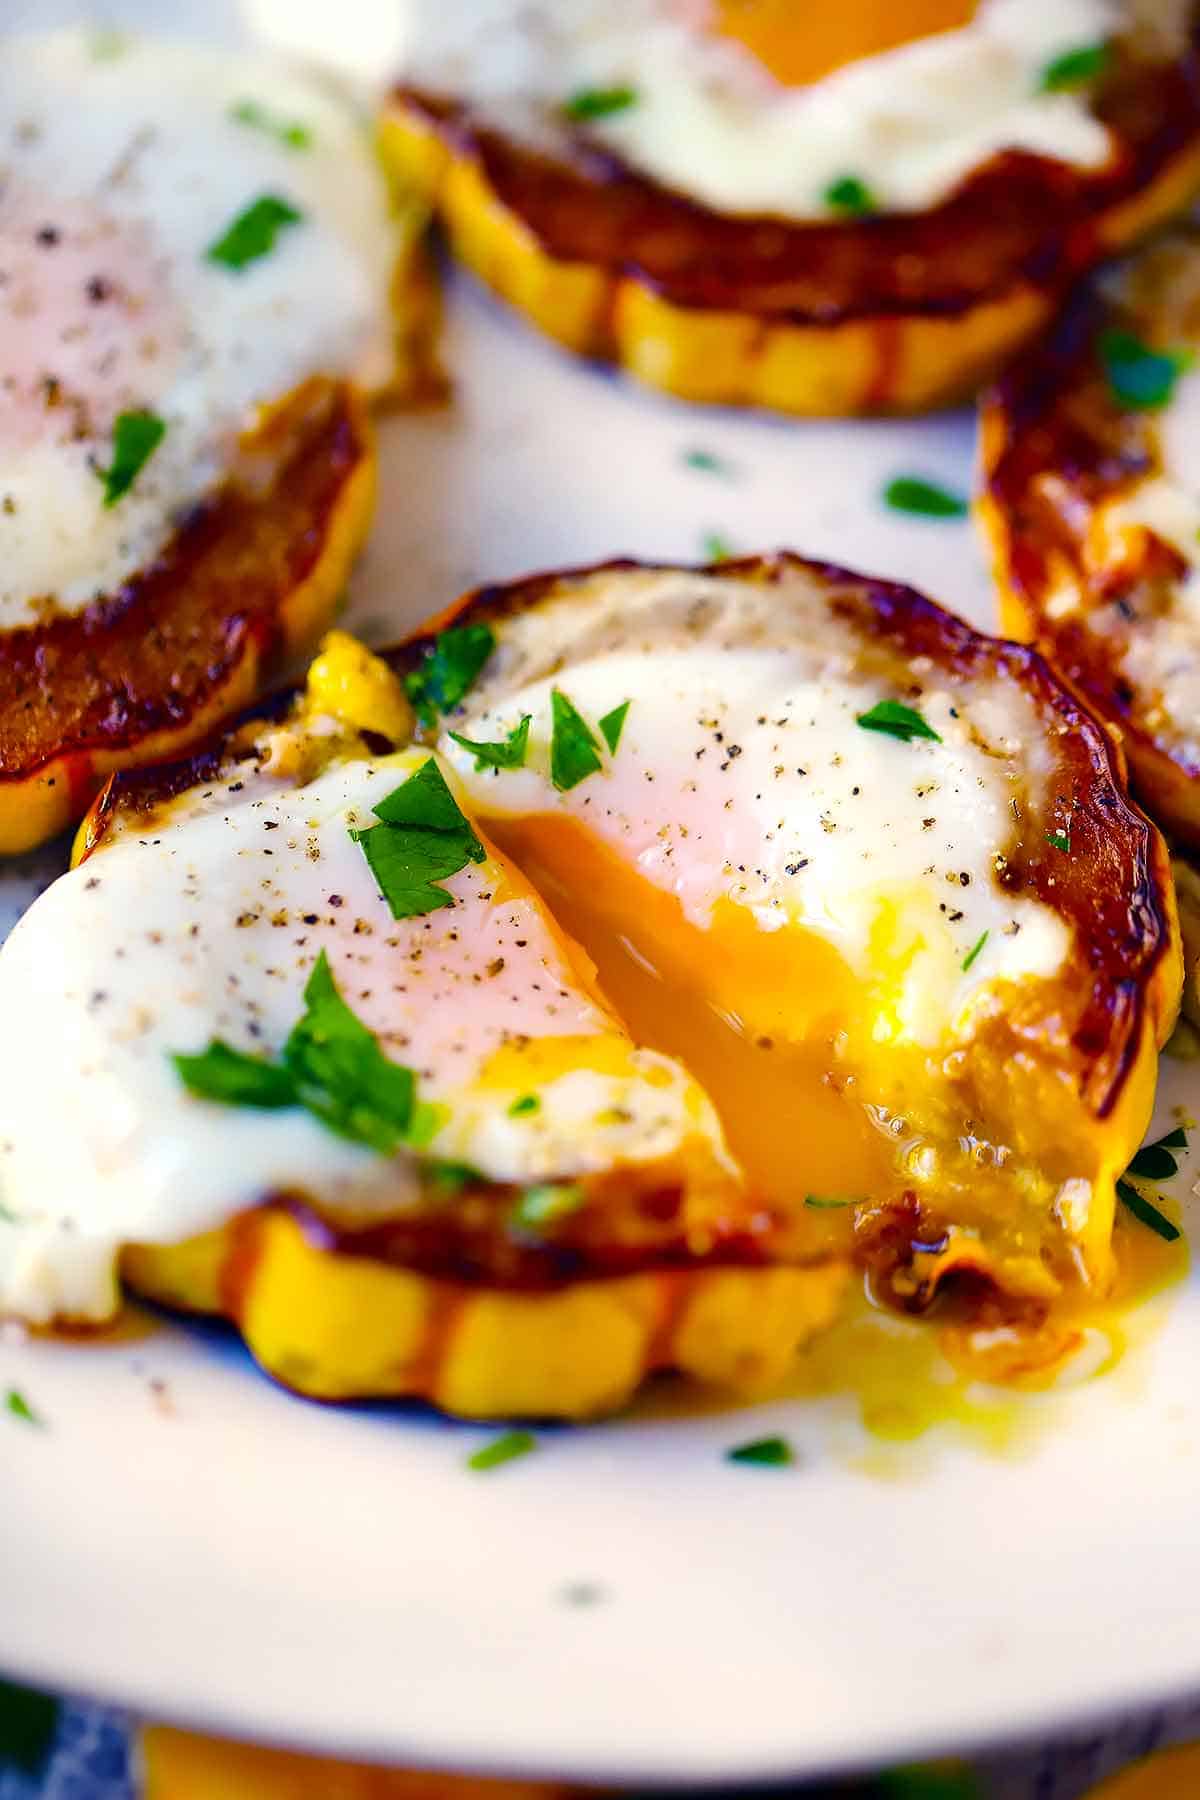 Close up photo of a fried egg with a runny yolk in a delicata squash ring.